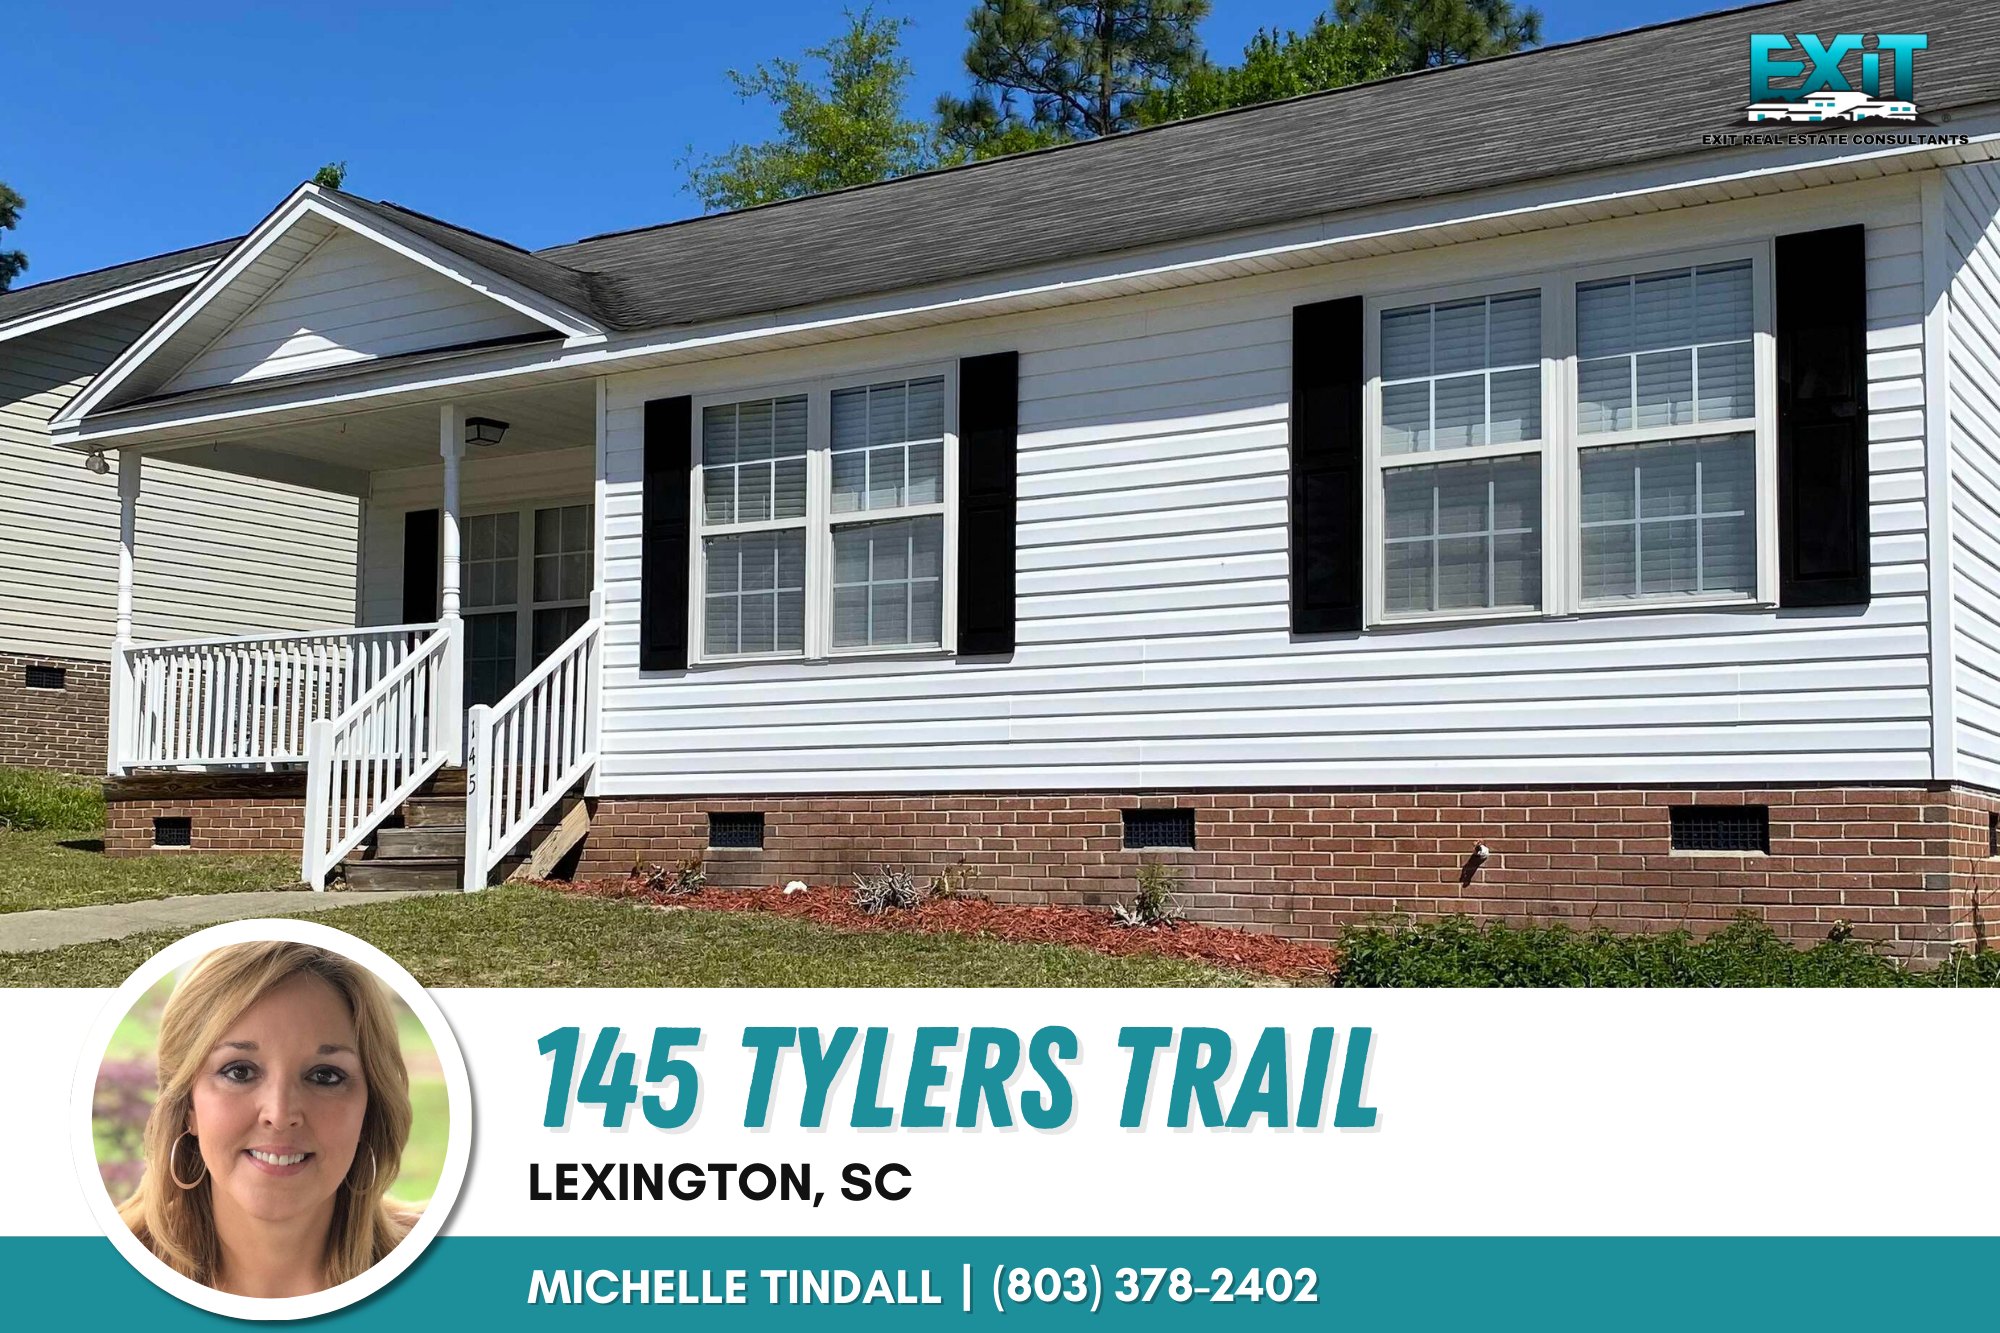 Just listed in Tylers Trail - Lexington